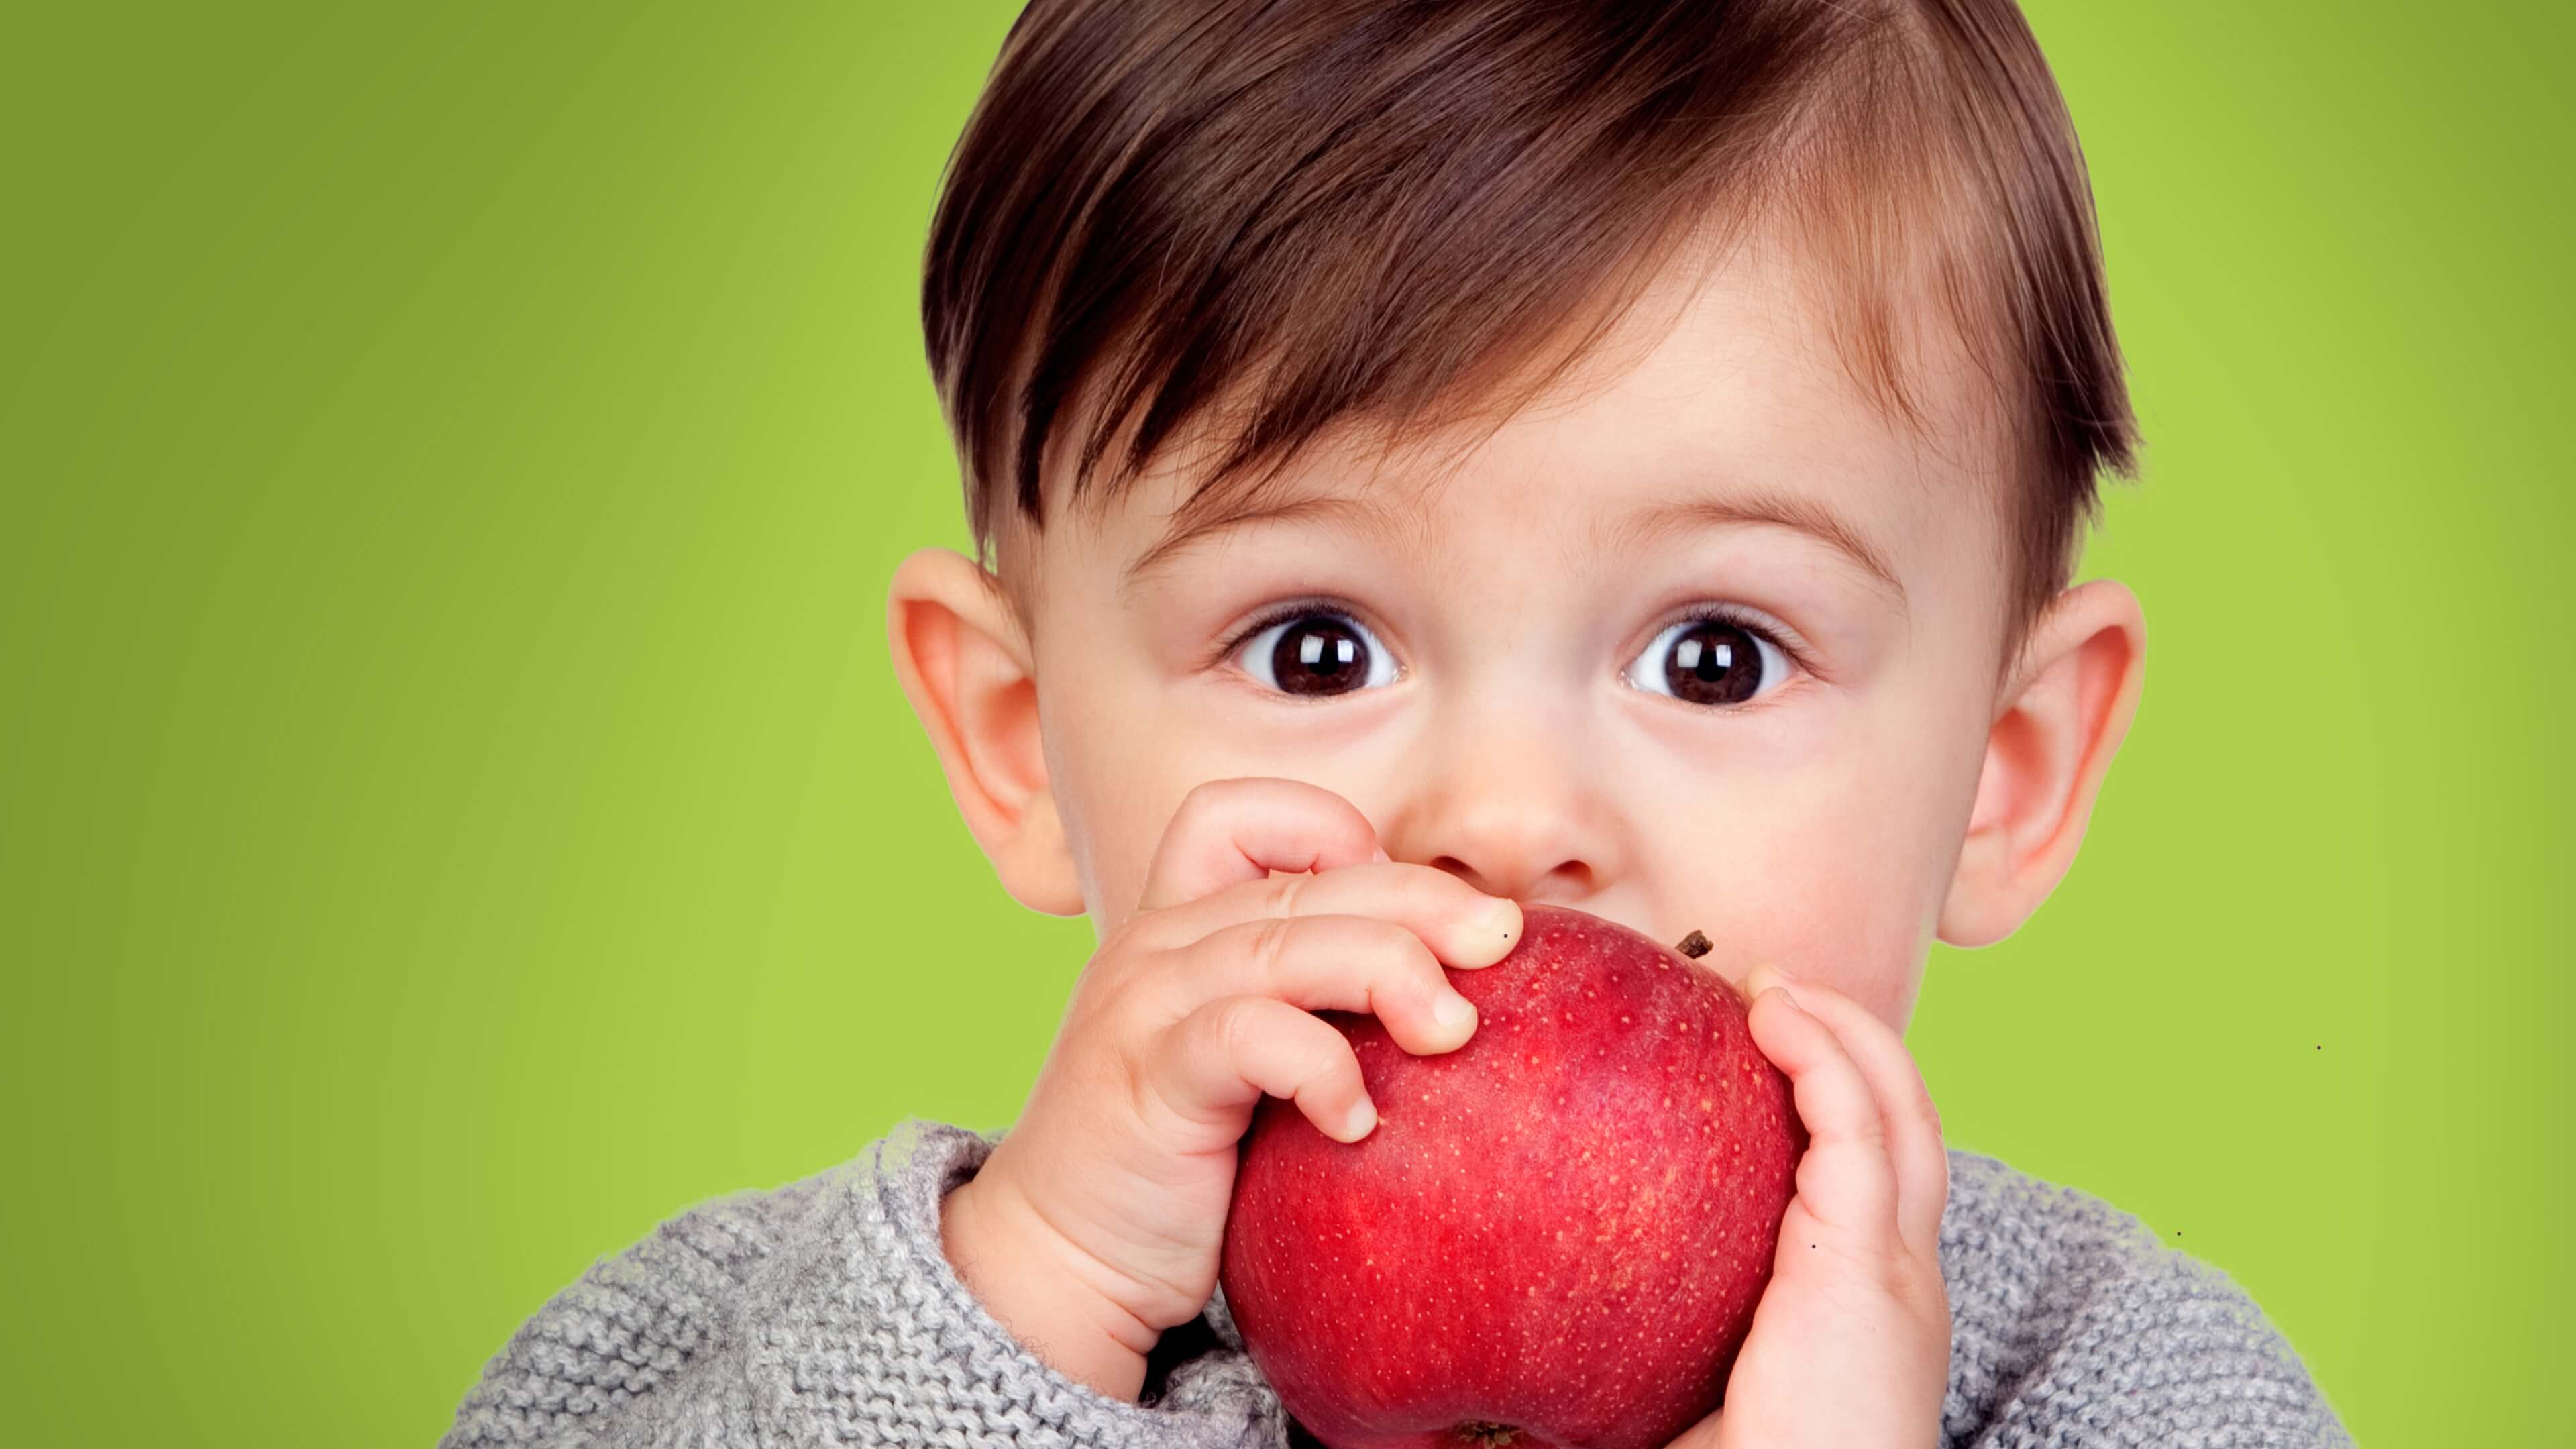 Baby's First Foods - A Straightforward Guide To Starting Solids